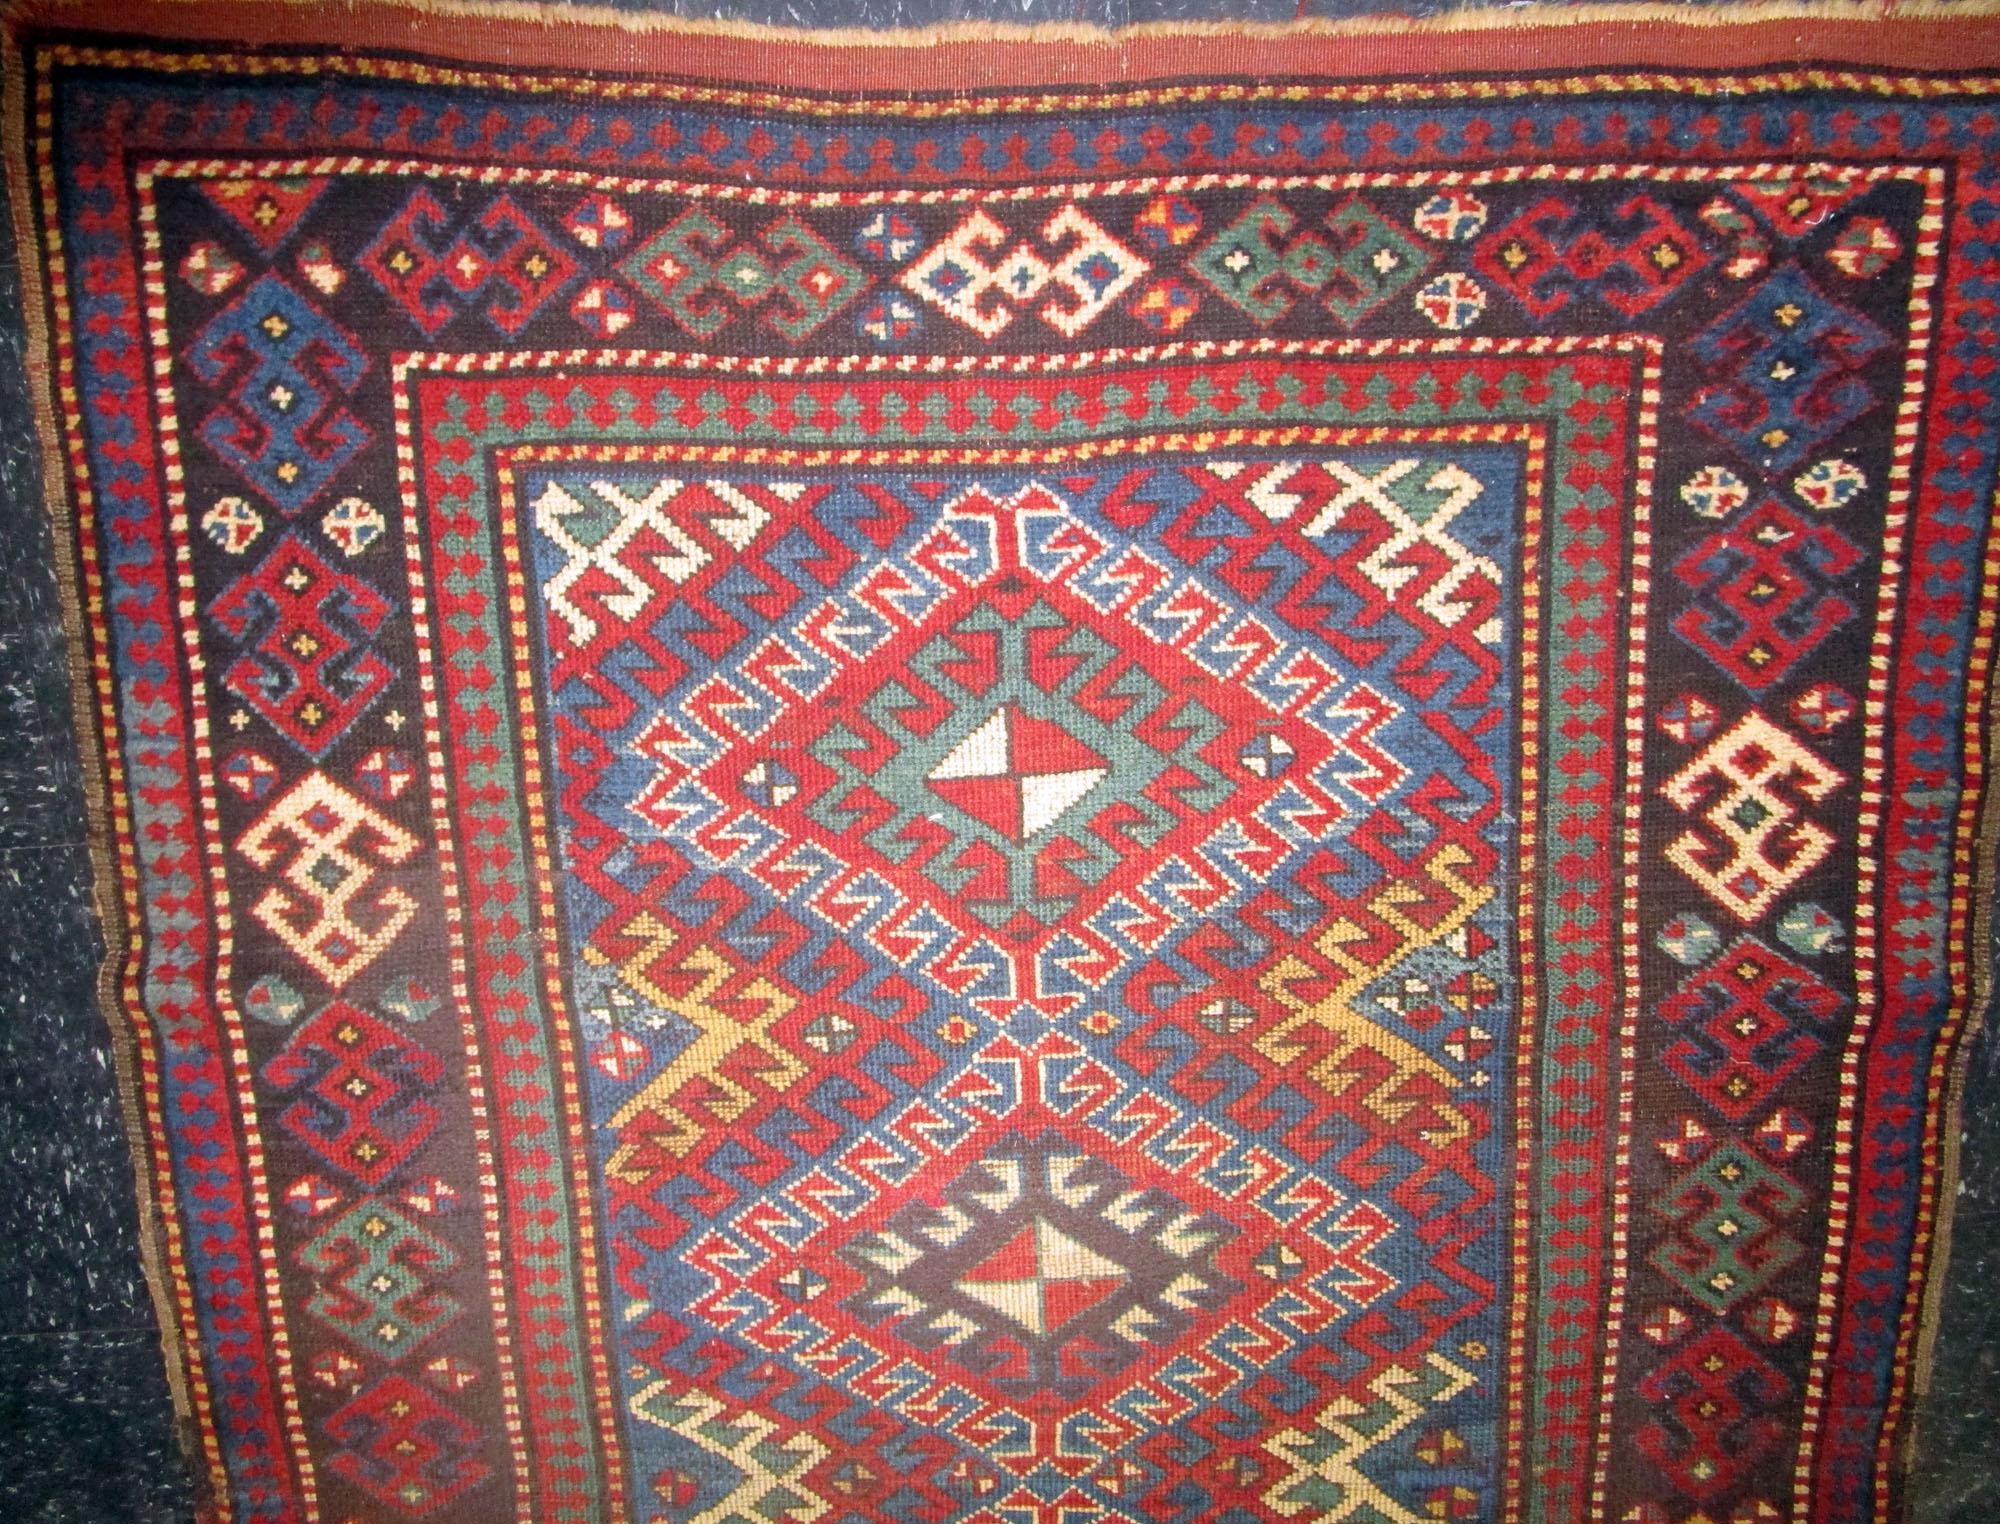 This handsome Kazak rug features a big, bold, dominating geometric diamond pattern with a smaller patterned backdrop, giving it an edge that differentiates it from other rugs on the market. The colors used are vibrant via the rug’s denser dyes, with